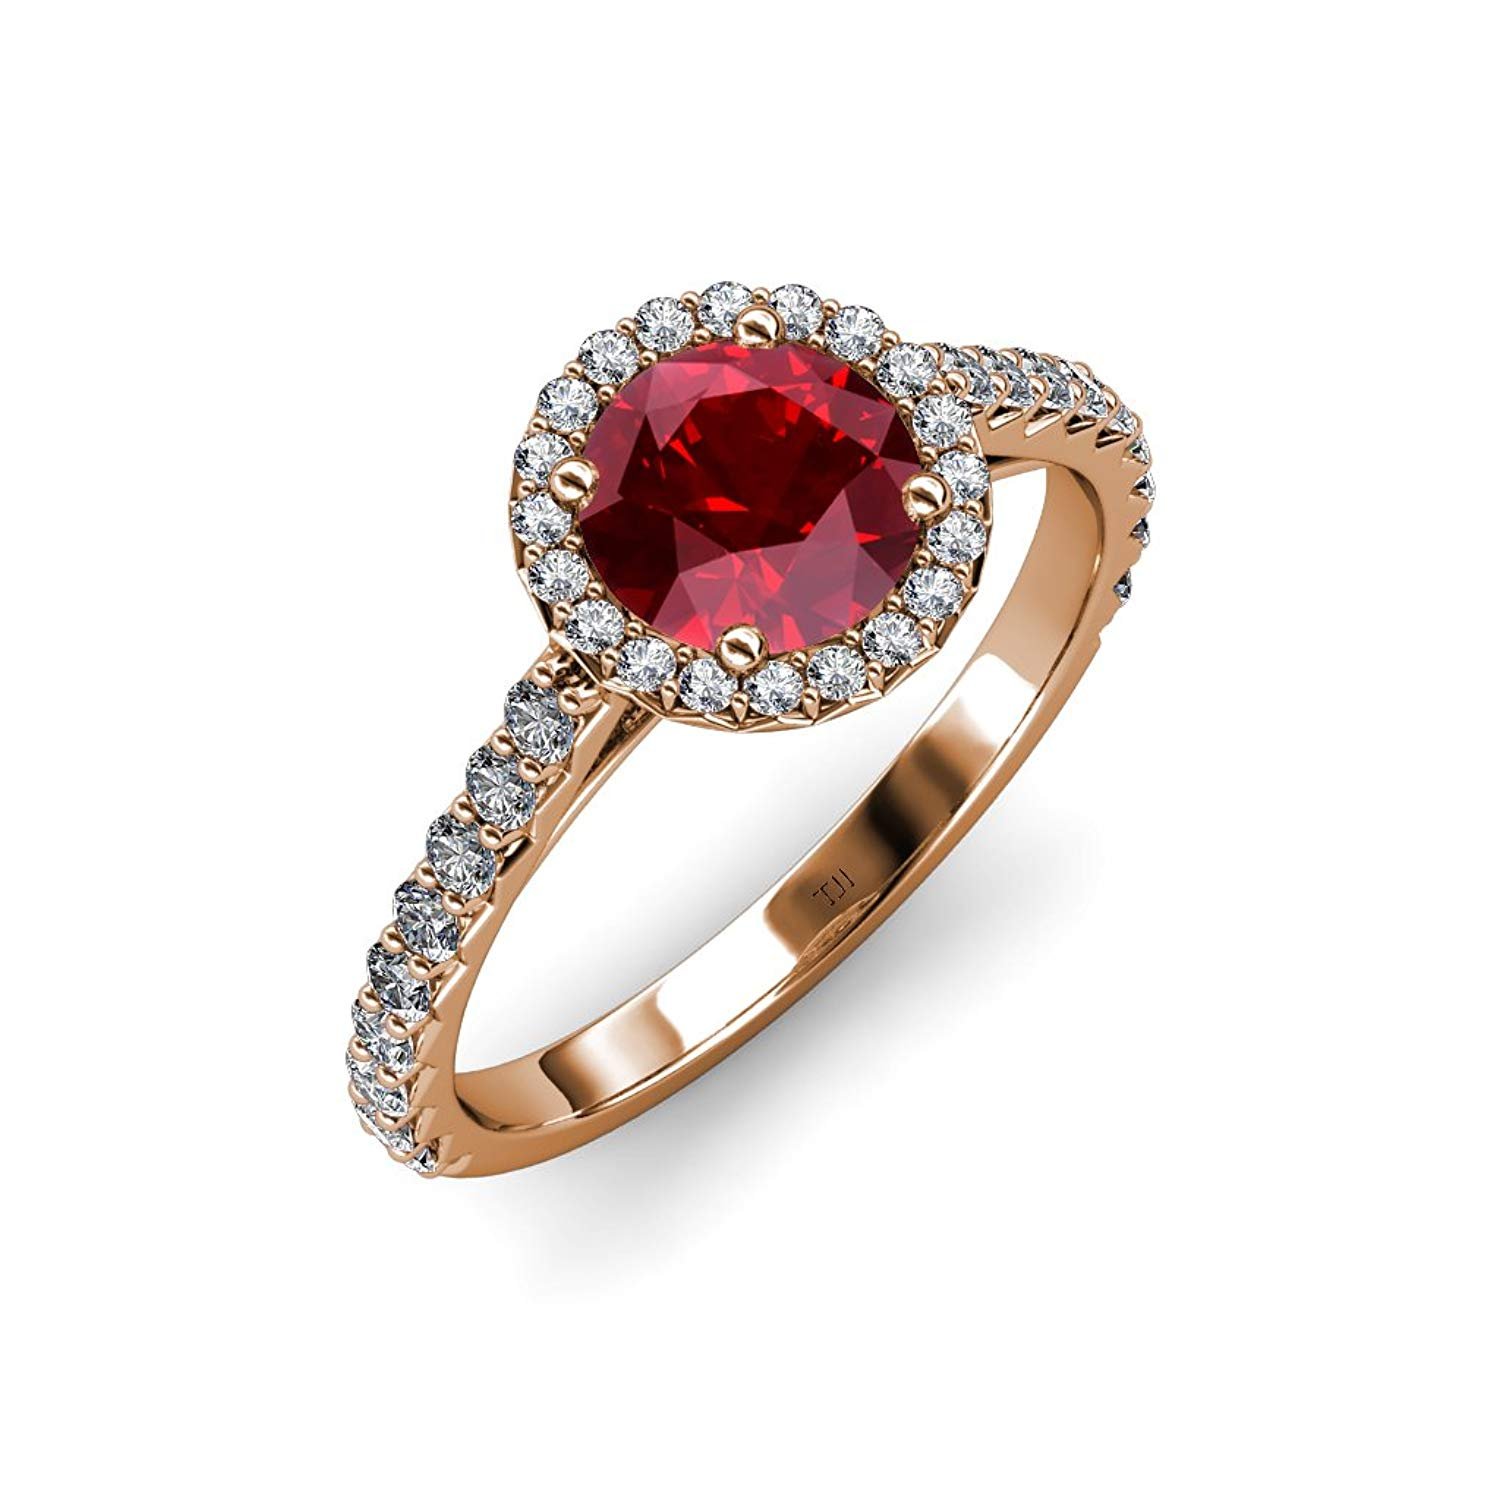 Ruby and Diamond (SI2-I1, G-H) Halo Engagement Ring 1.33 ct tw in 14K Rose Gold.size 8.5 - image 3 of 8